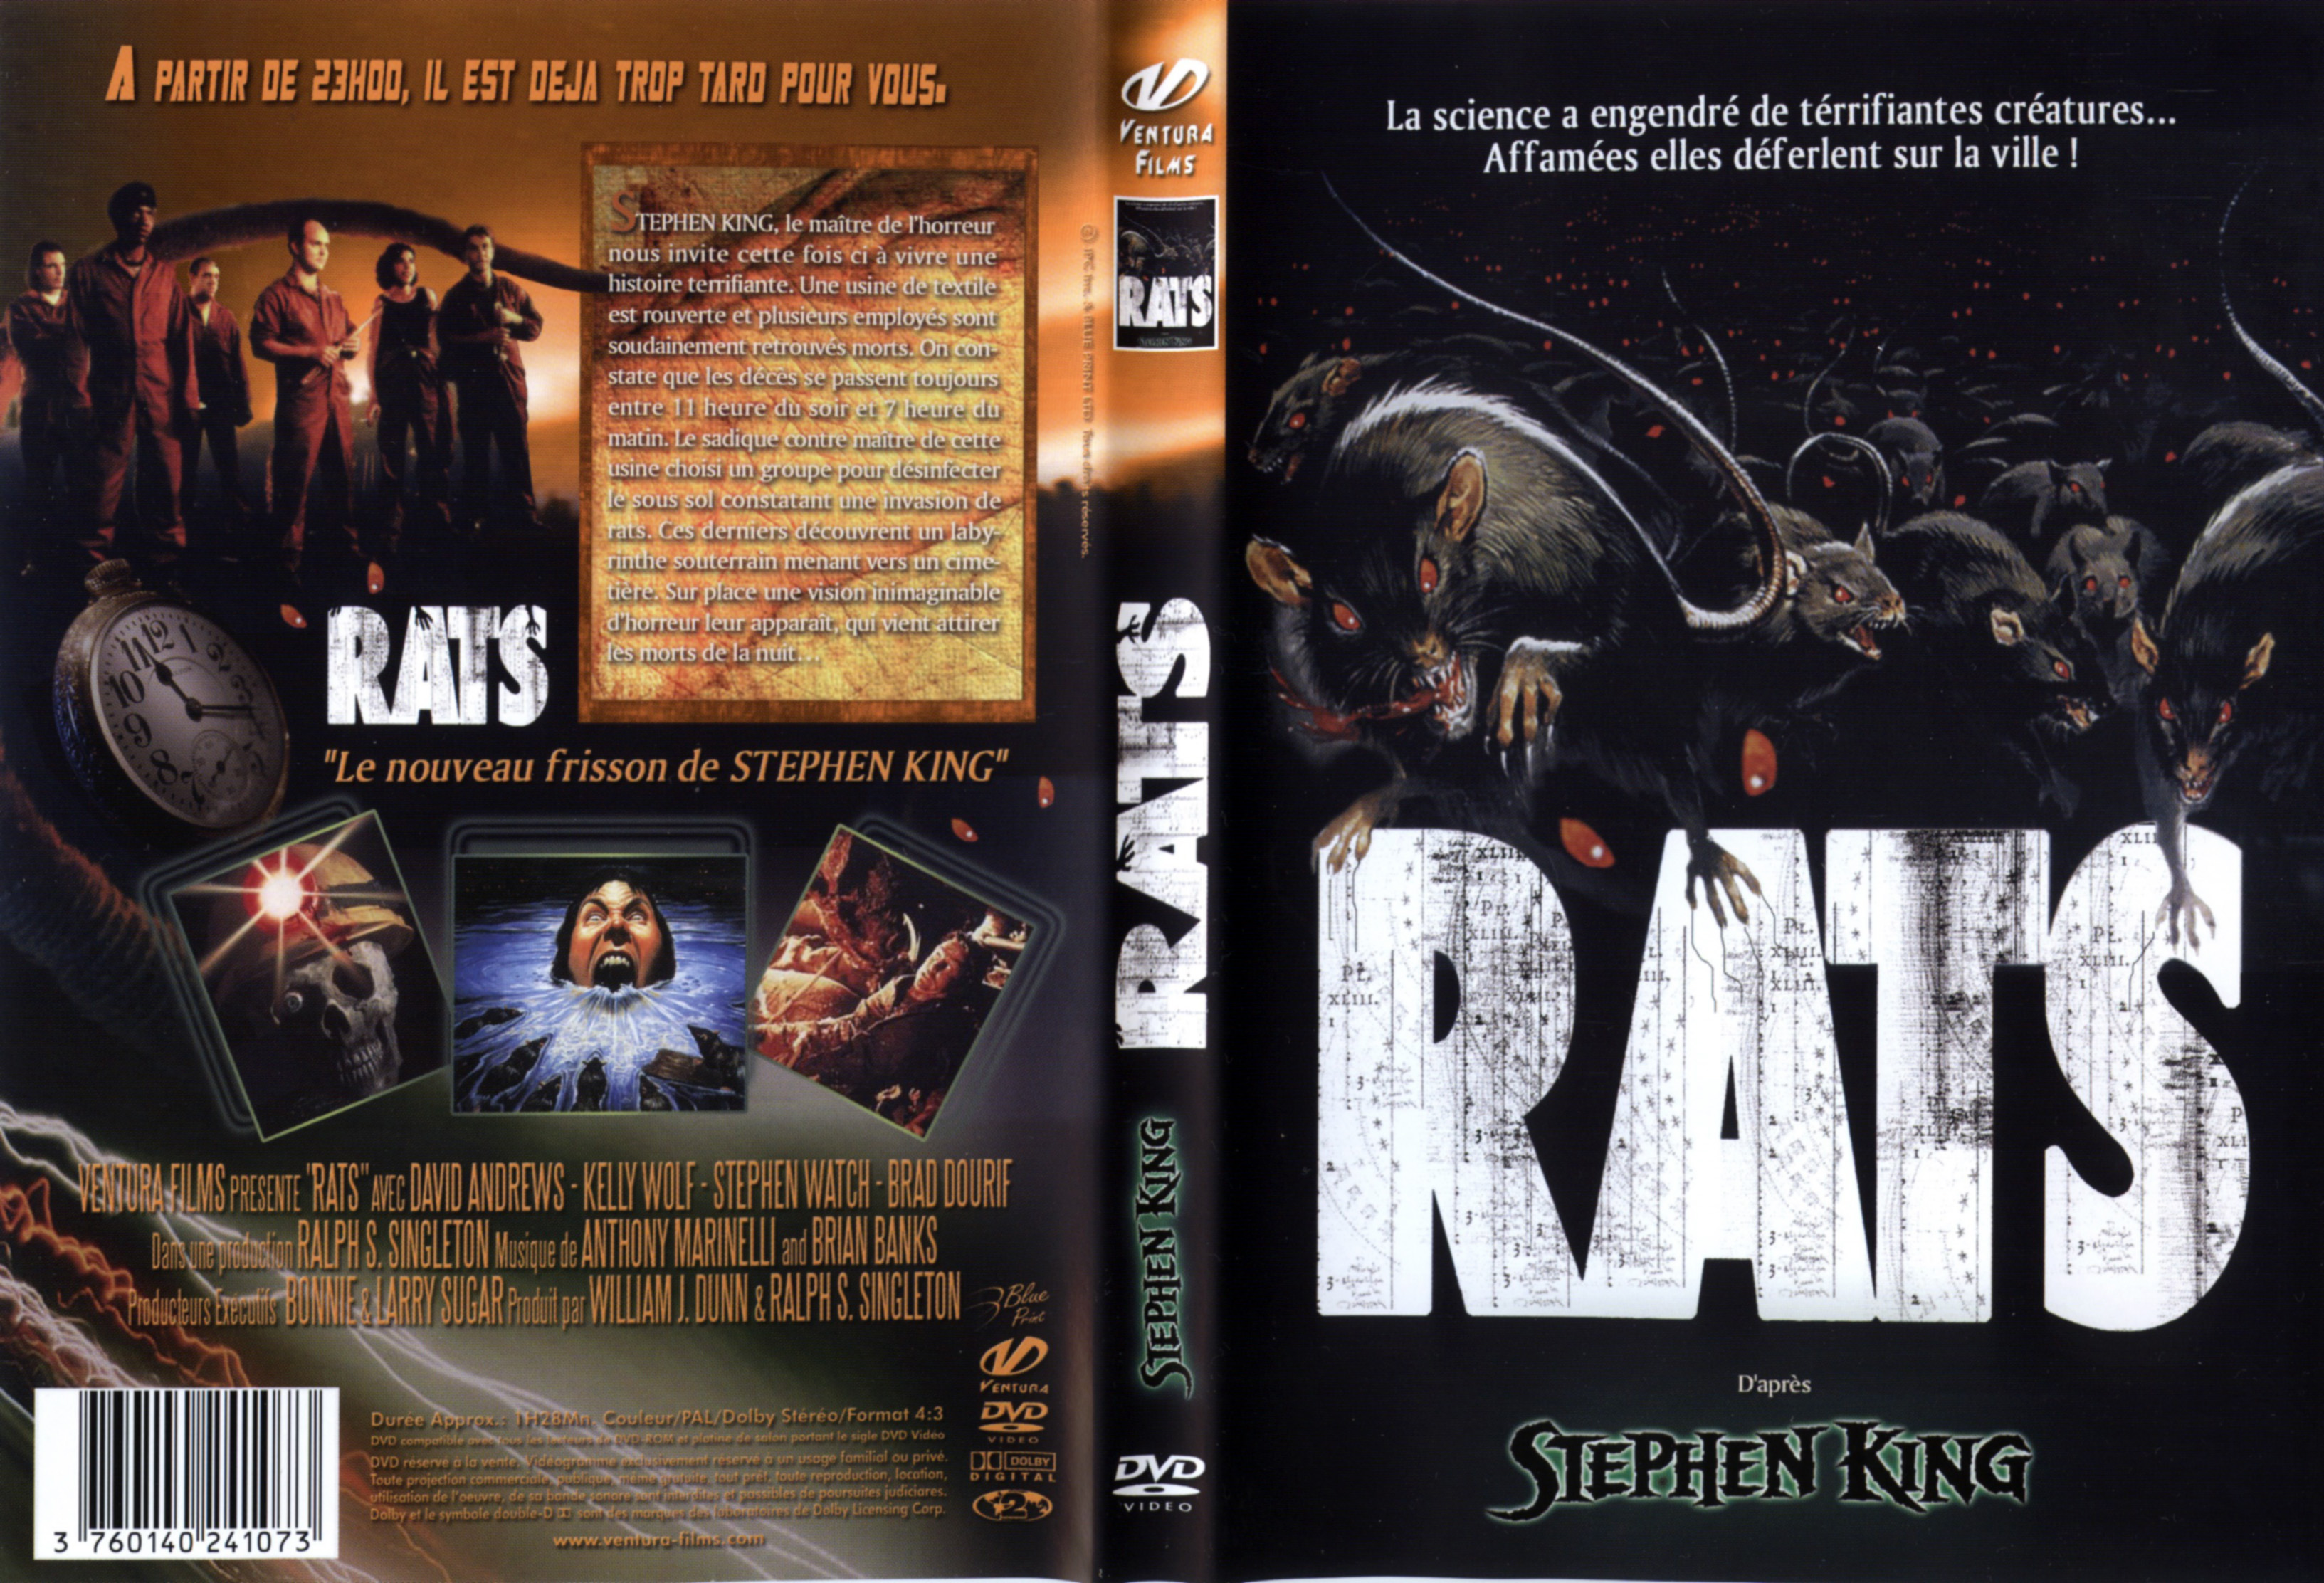 Jaquette DVD Rats (Stephen King)